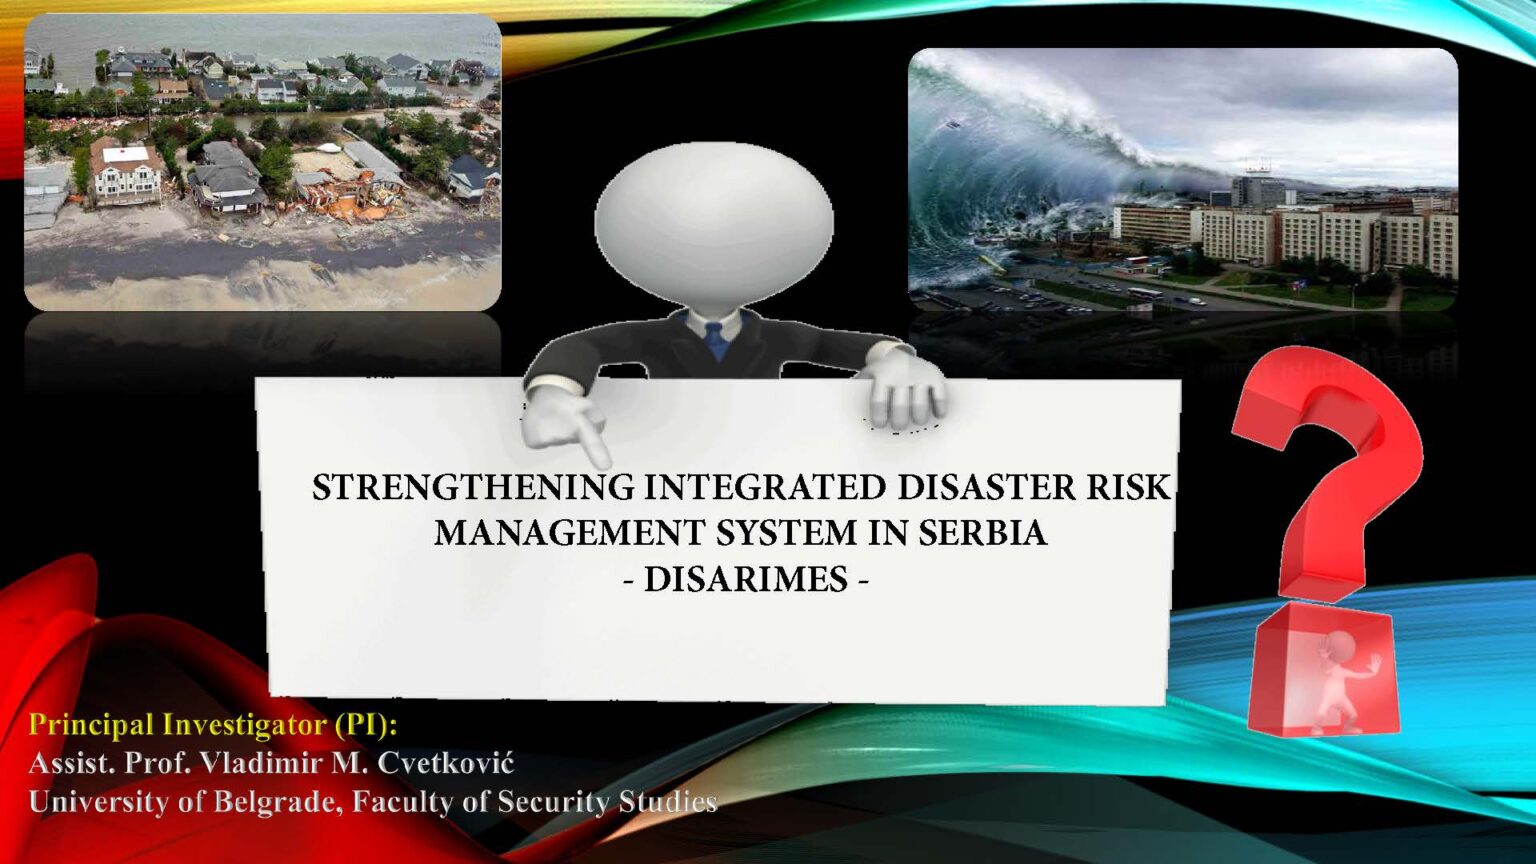 STRENGTHENING INTEGRATED DISASTER RISK MANAGEMENT SYSTEM IN SERBIA-DISARIMES-